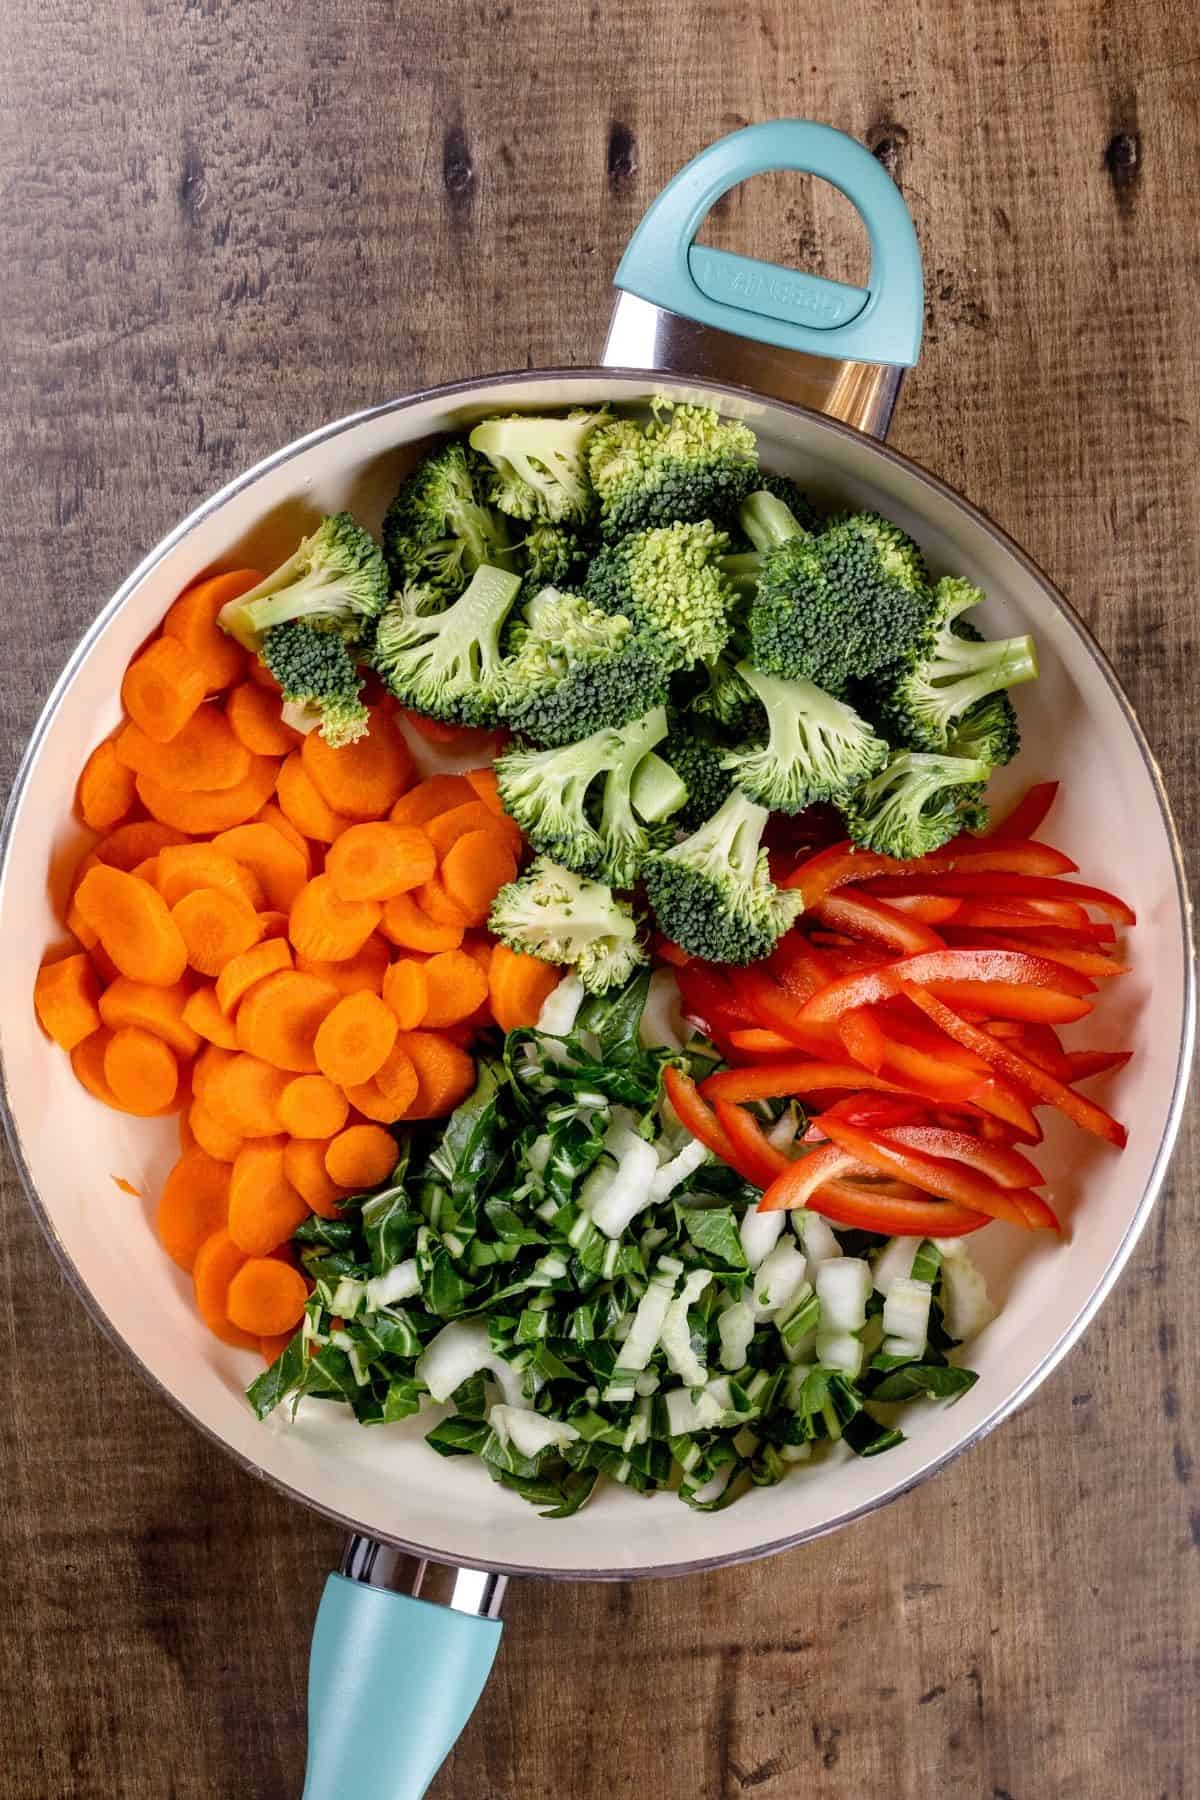 Uncooked veggies like broccoli, carrots, and bell peppers in a blue and white skillet on a wood table.